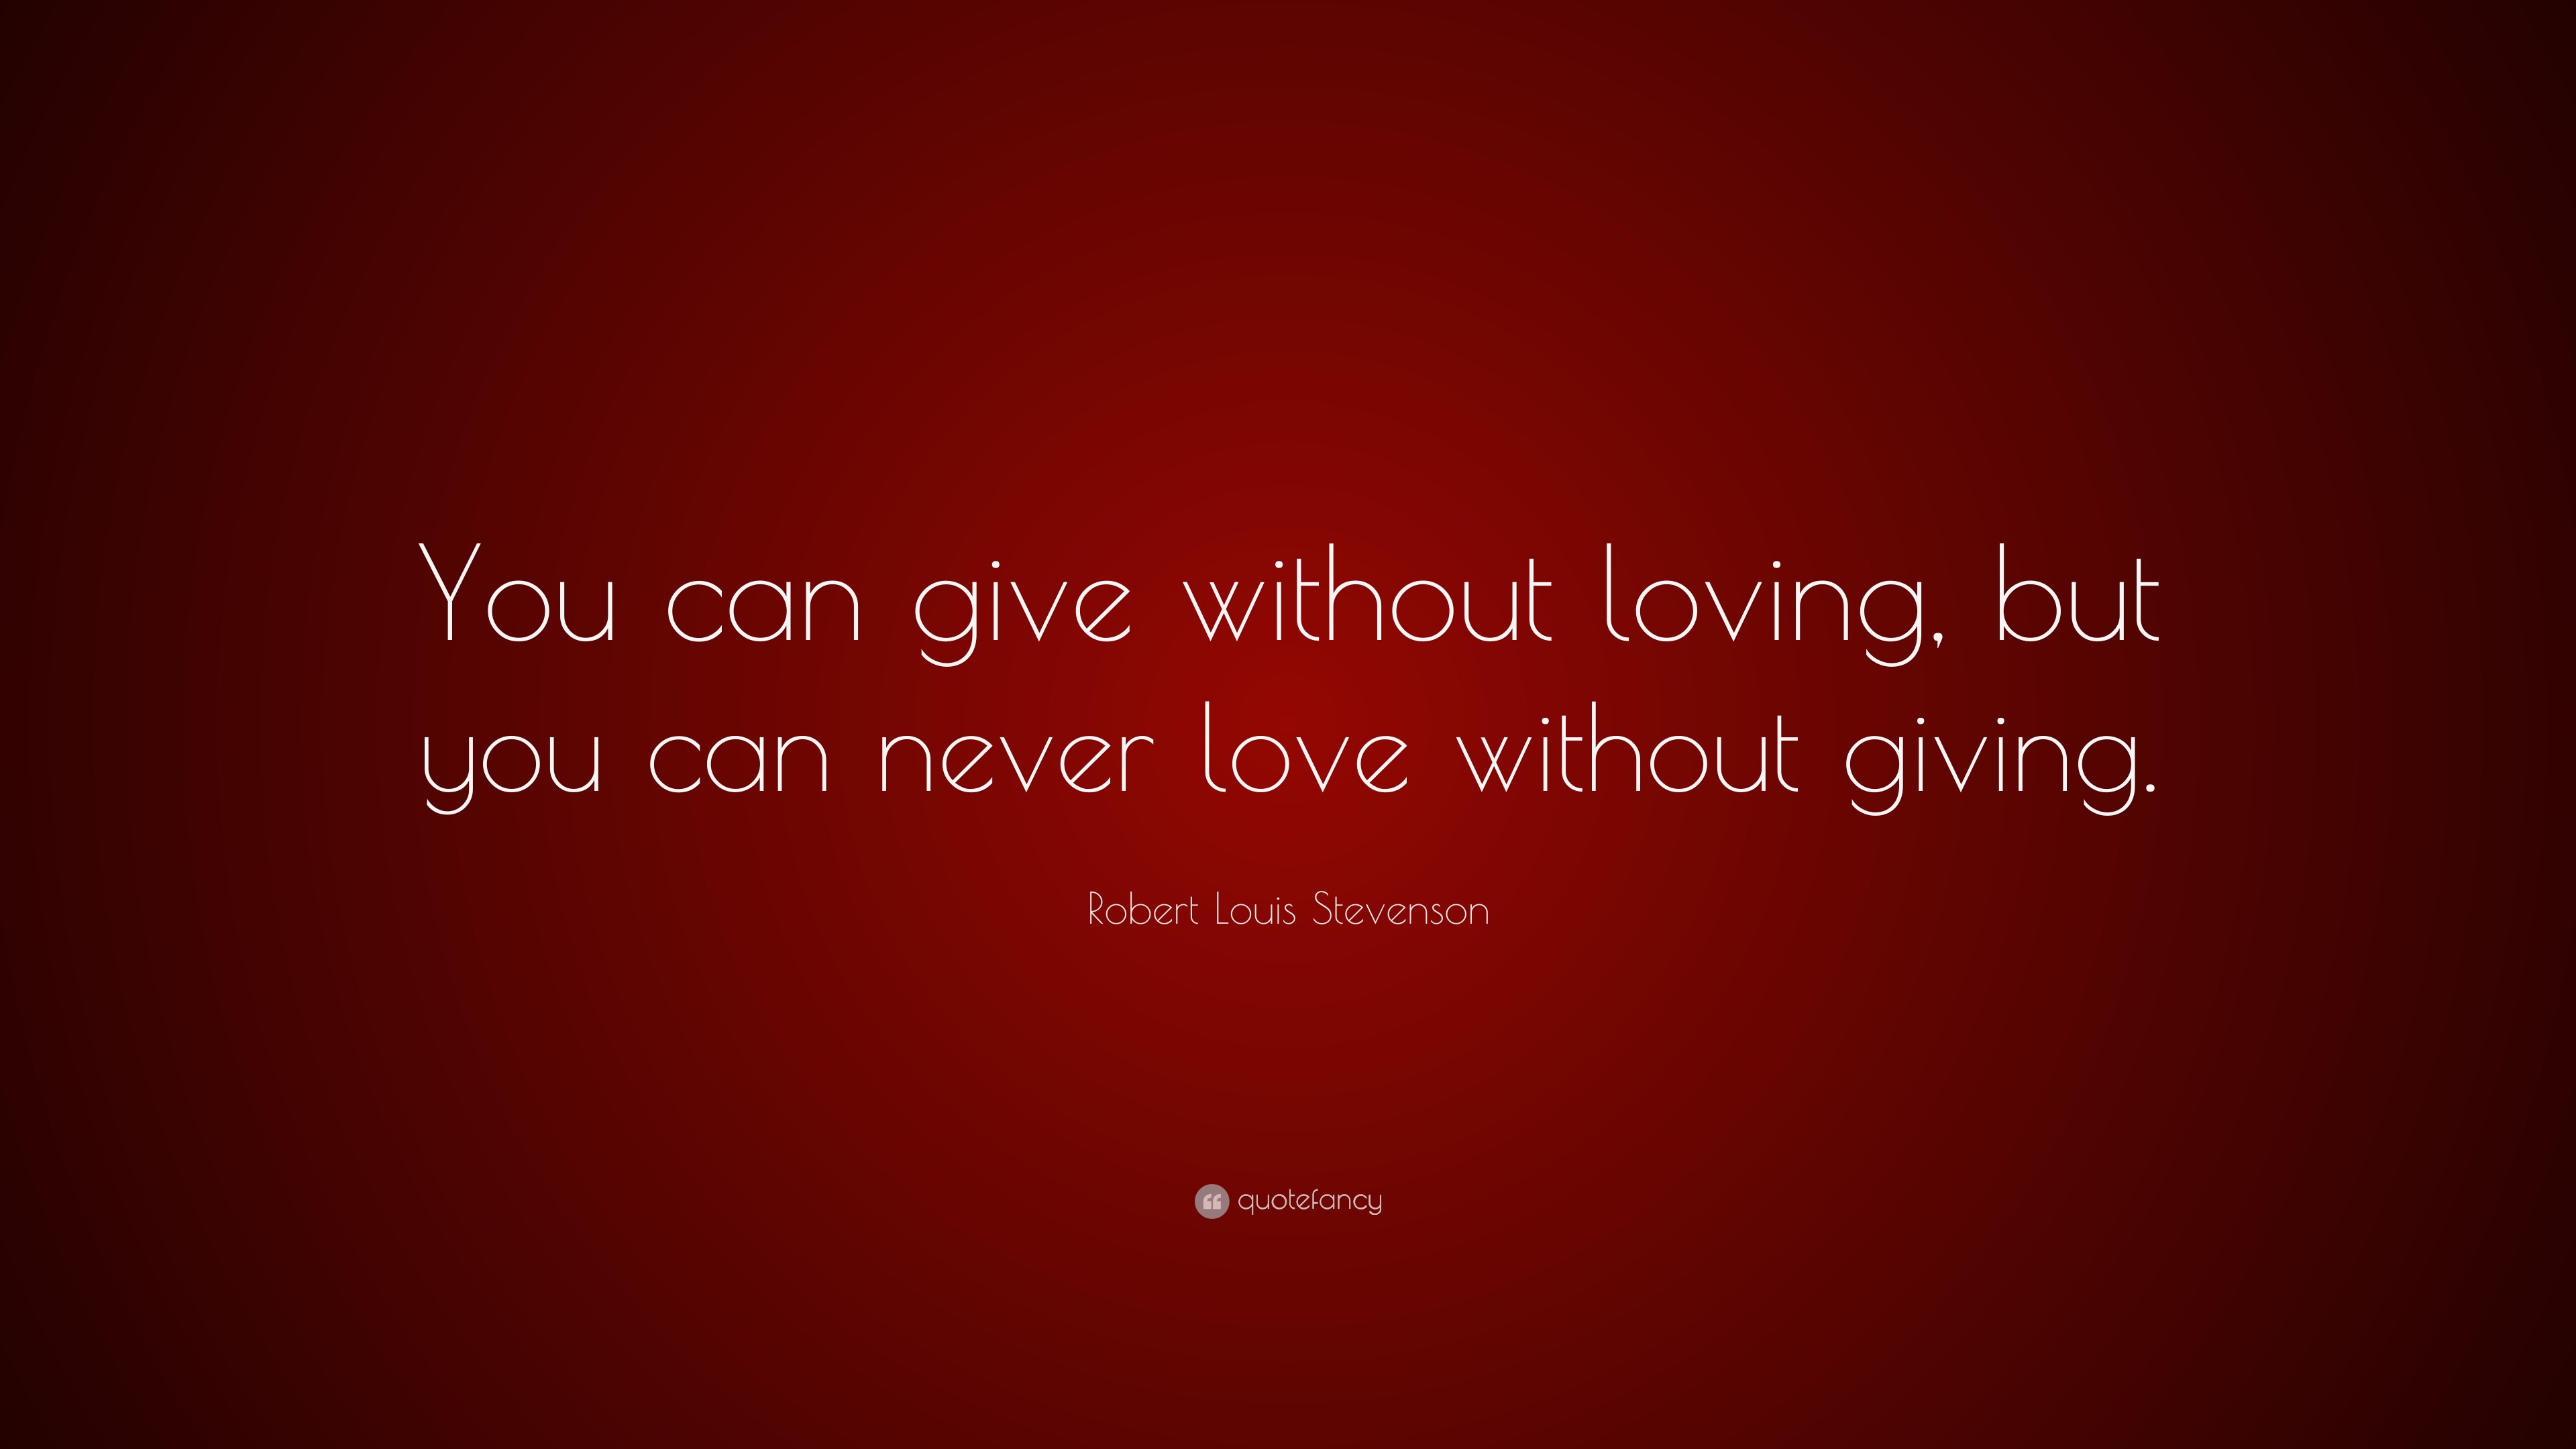 Robert Louis Stevenson Quote: “You can give without loving, but you can never love without ...